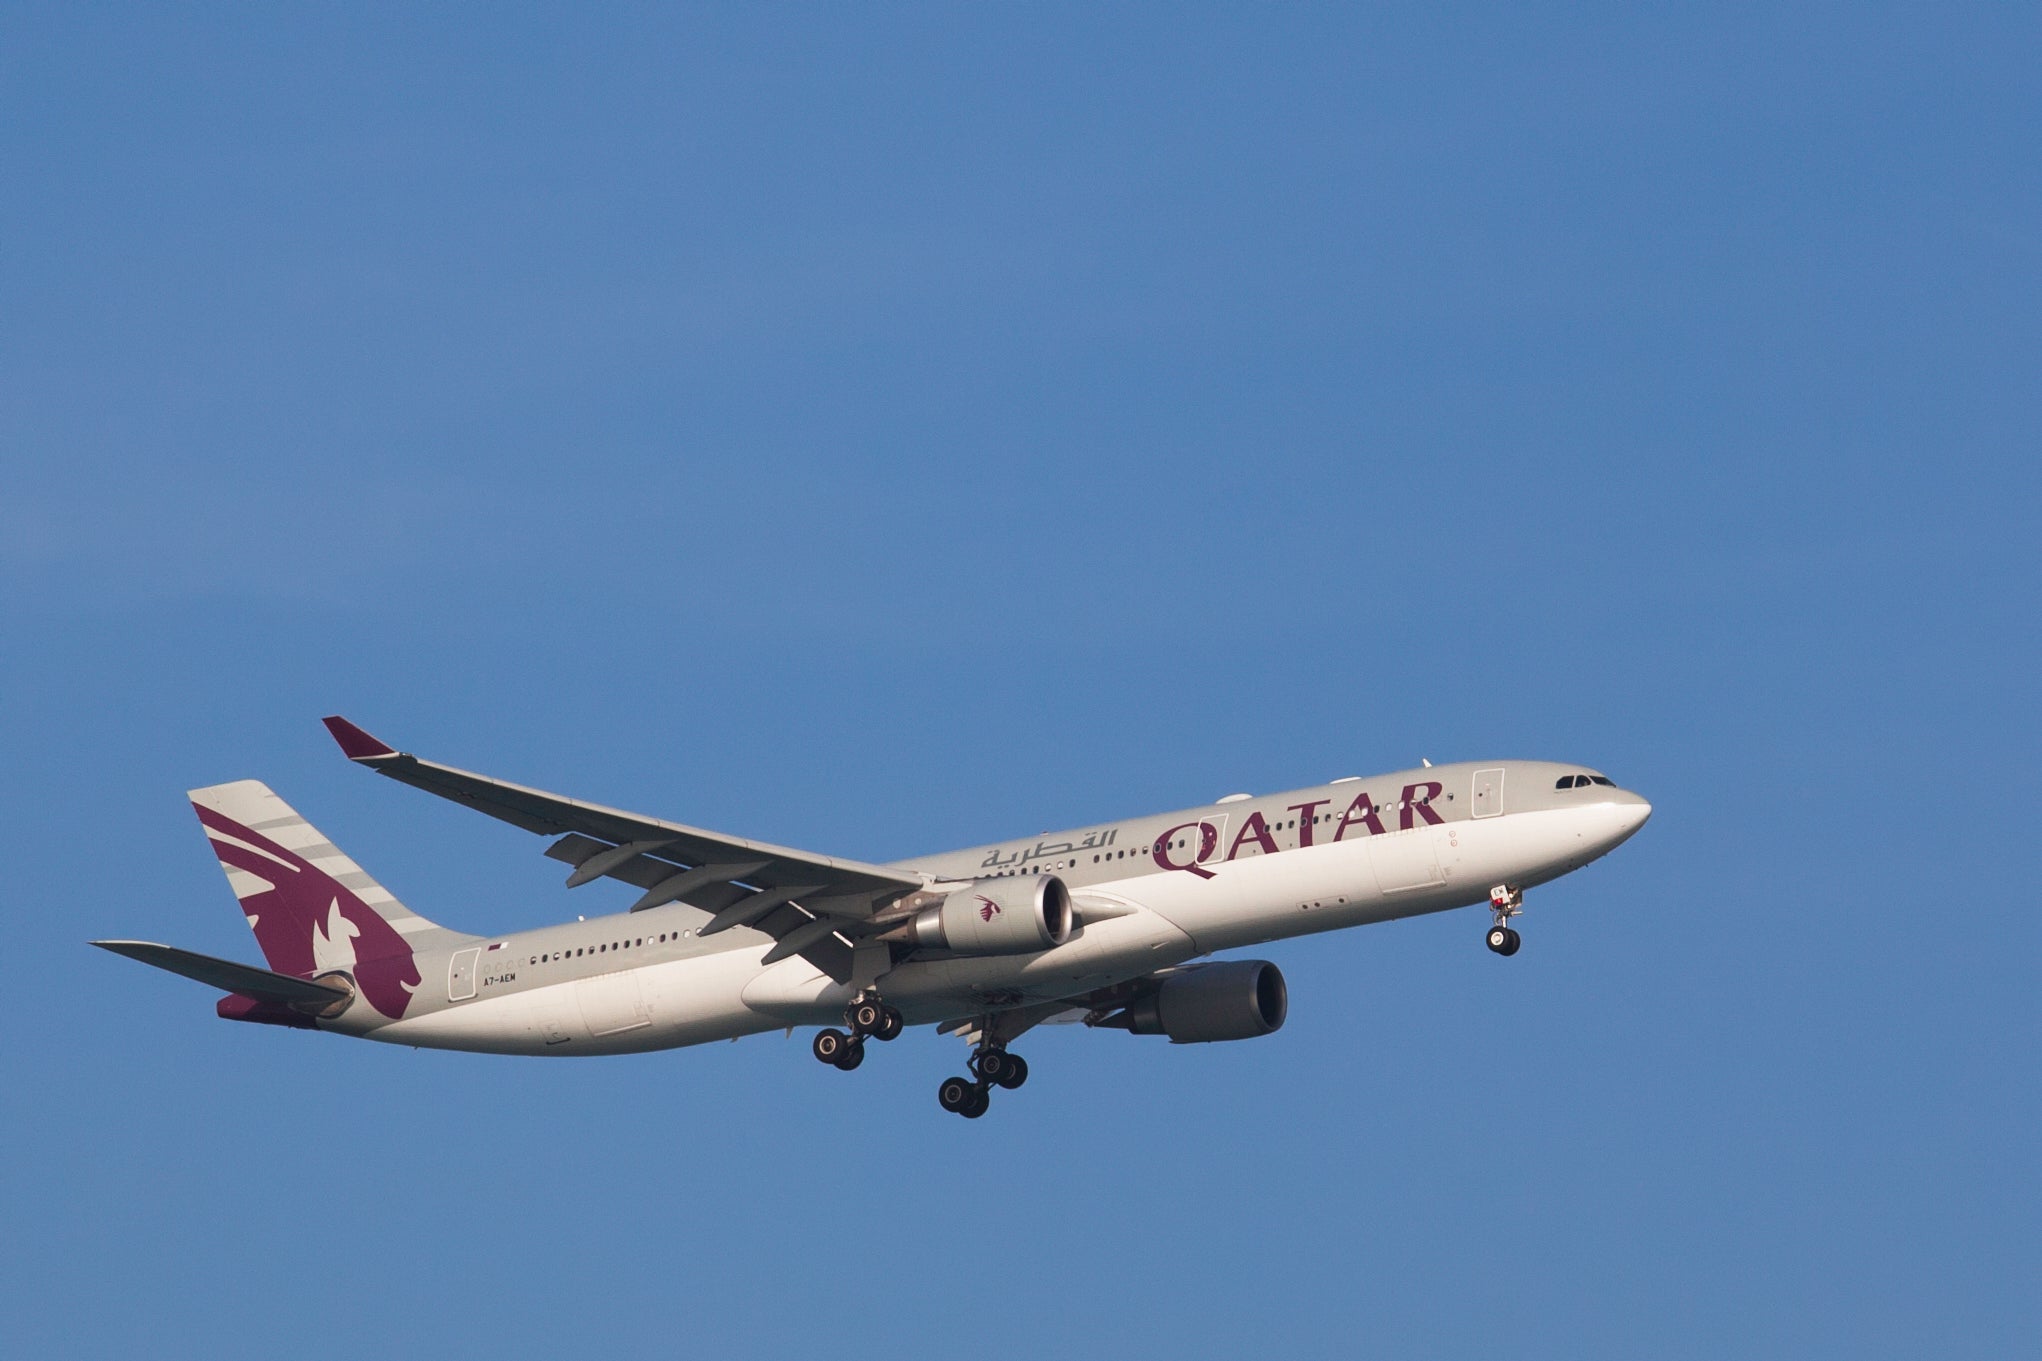 Qatar Airways insists the woman was refused travel due to her behaviour